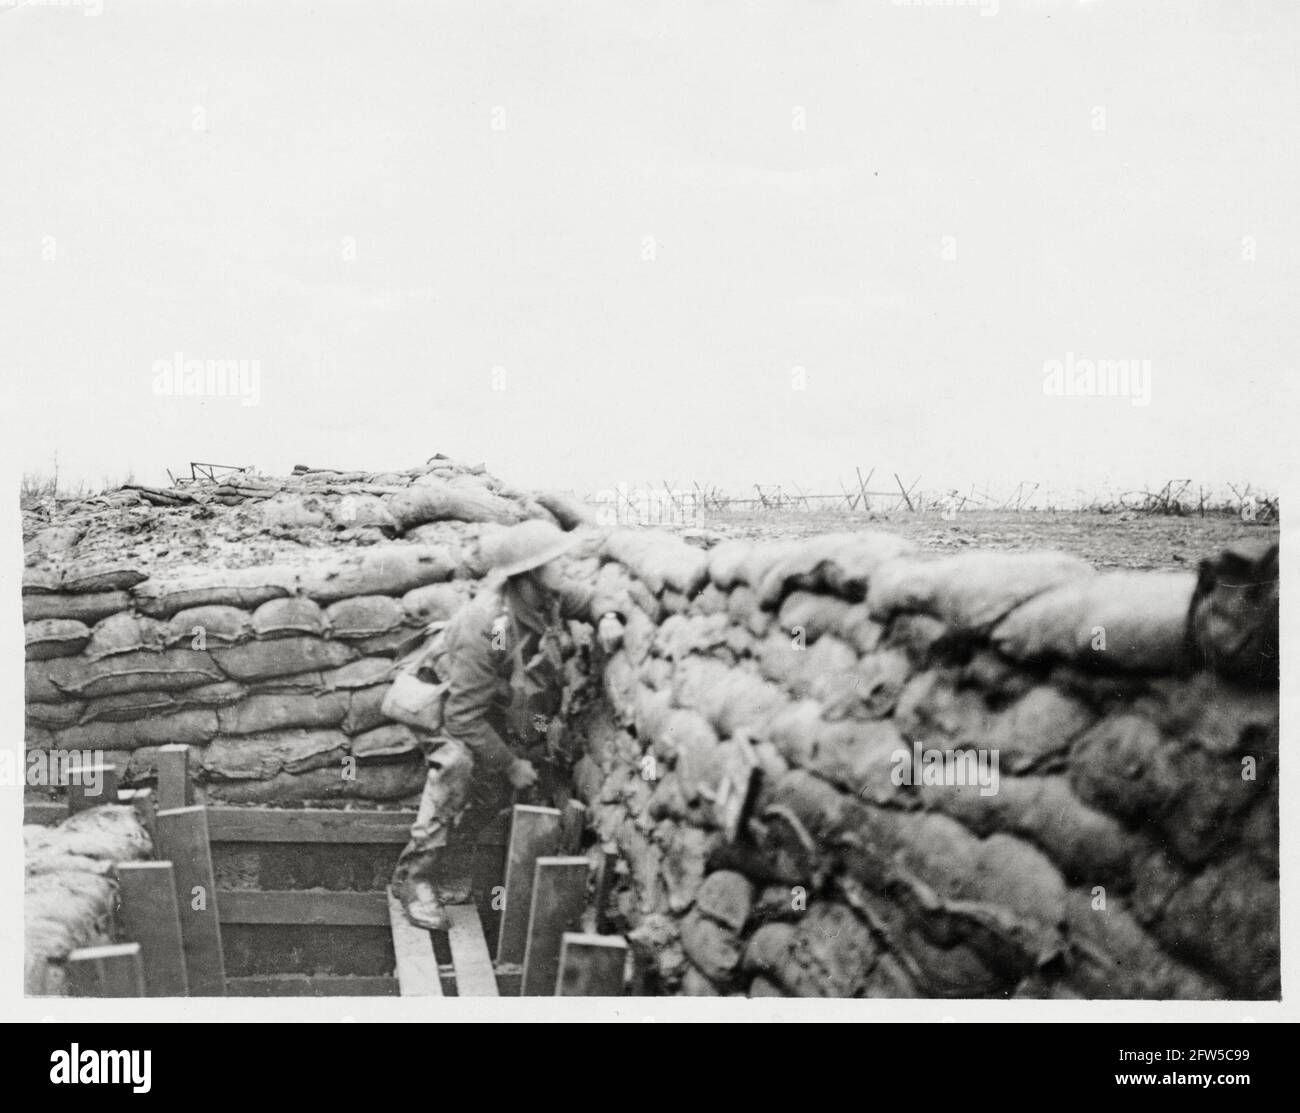 World War One, WWI, Western Front - A Look-out in a front line trench ...